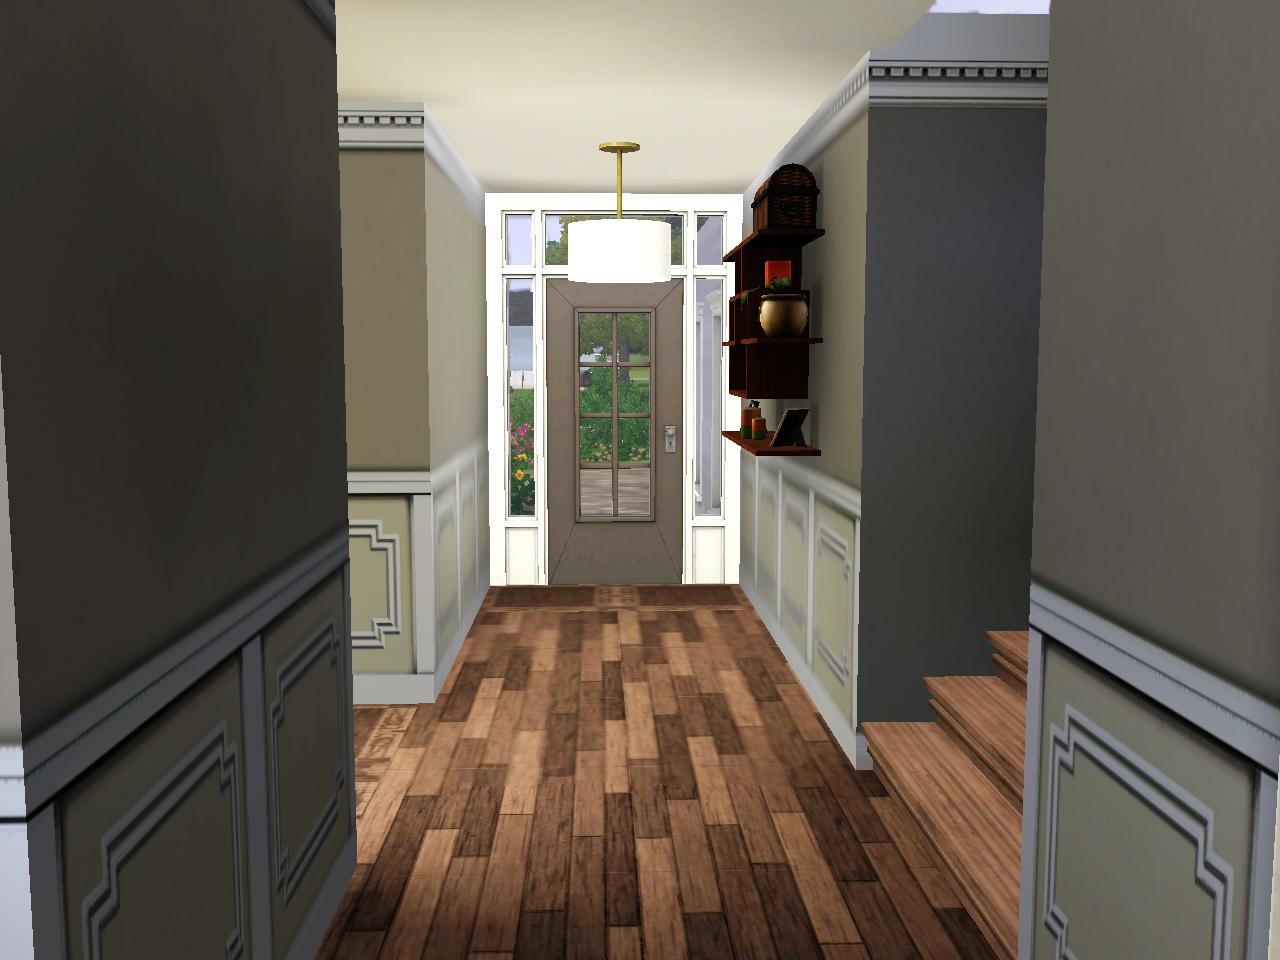 My Sims 3 Blog: 4 Bed Bungalow by stevo445